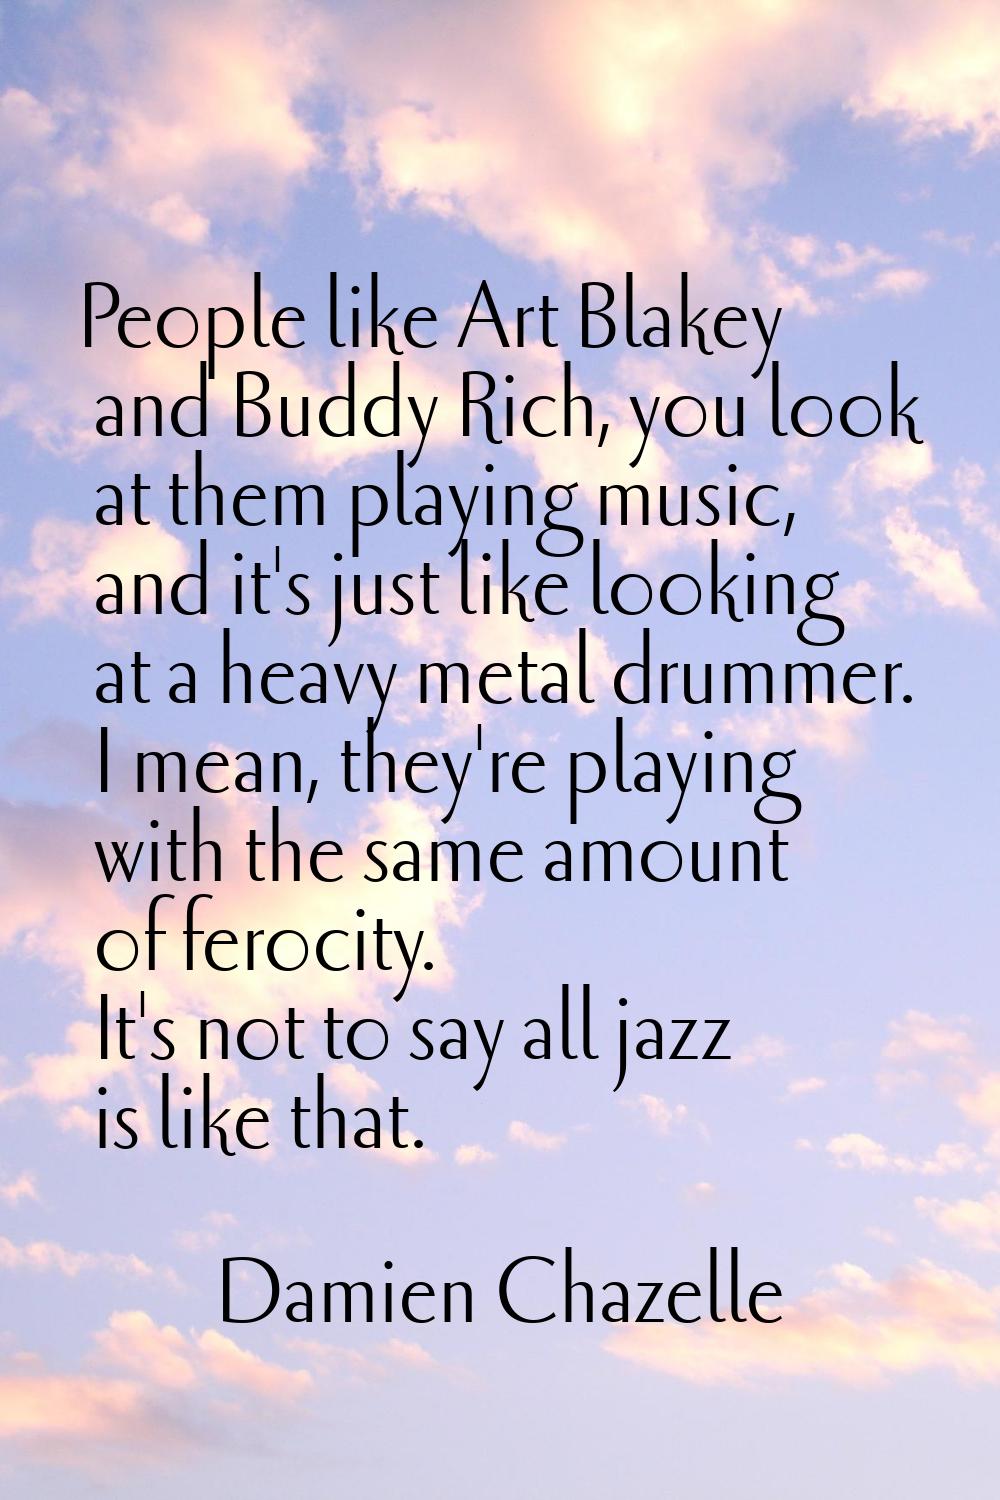 People like Art Blakey and Buddy Rich, you look at them playing music, and it's just like looking a